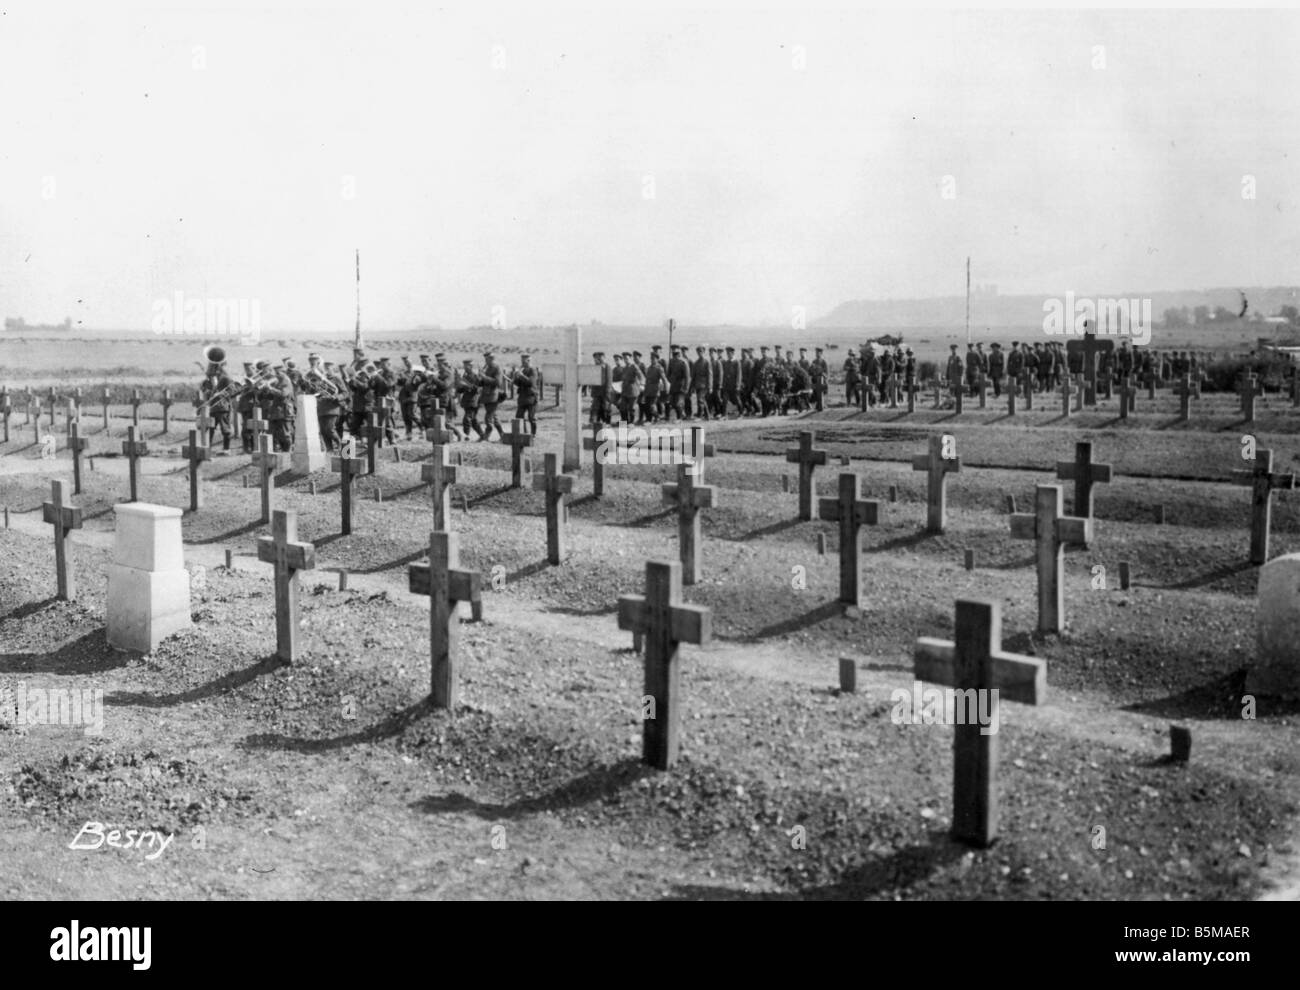 2 G55 W1 1918 16 Funeral march for German pilot 1918 History World War I Western Front Funeral for a German pilot in Besny n sum Stock Photo